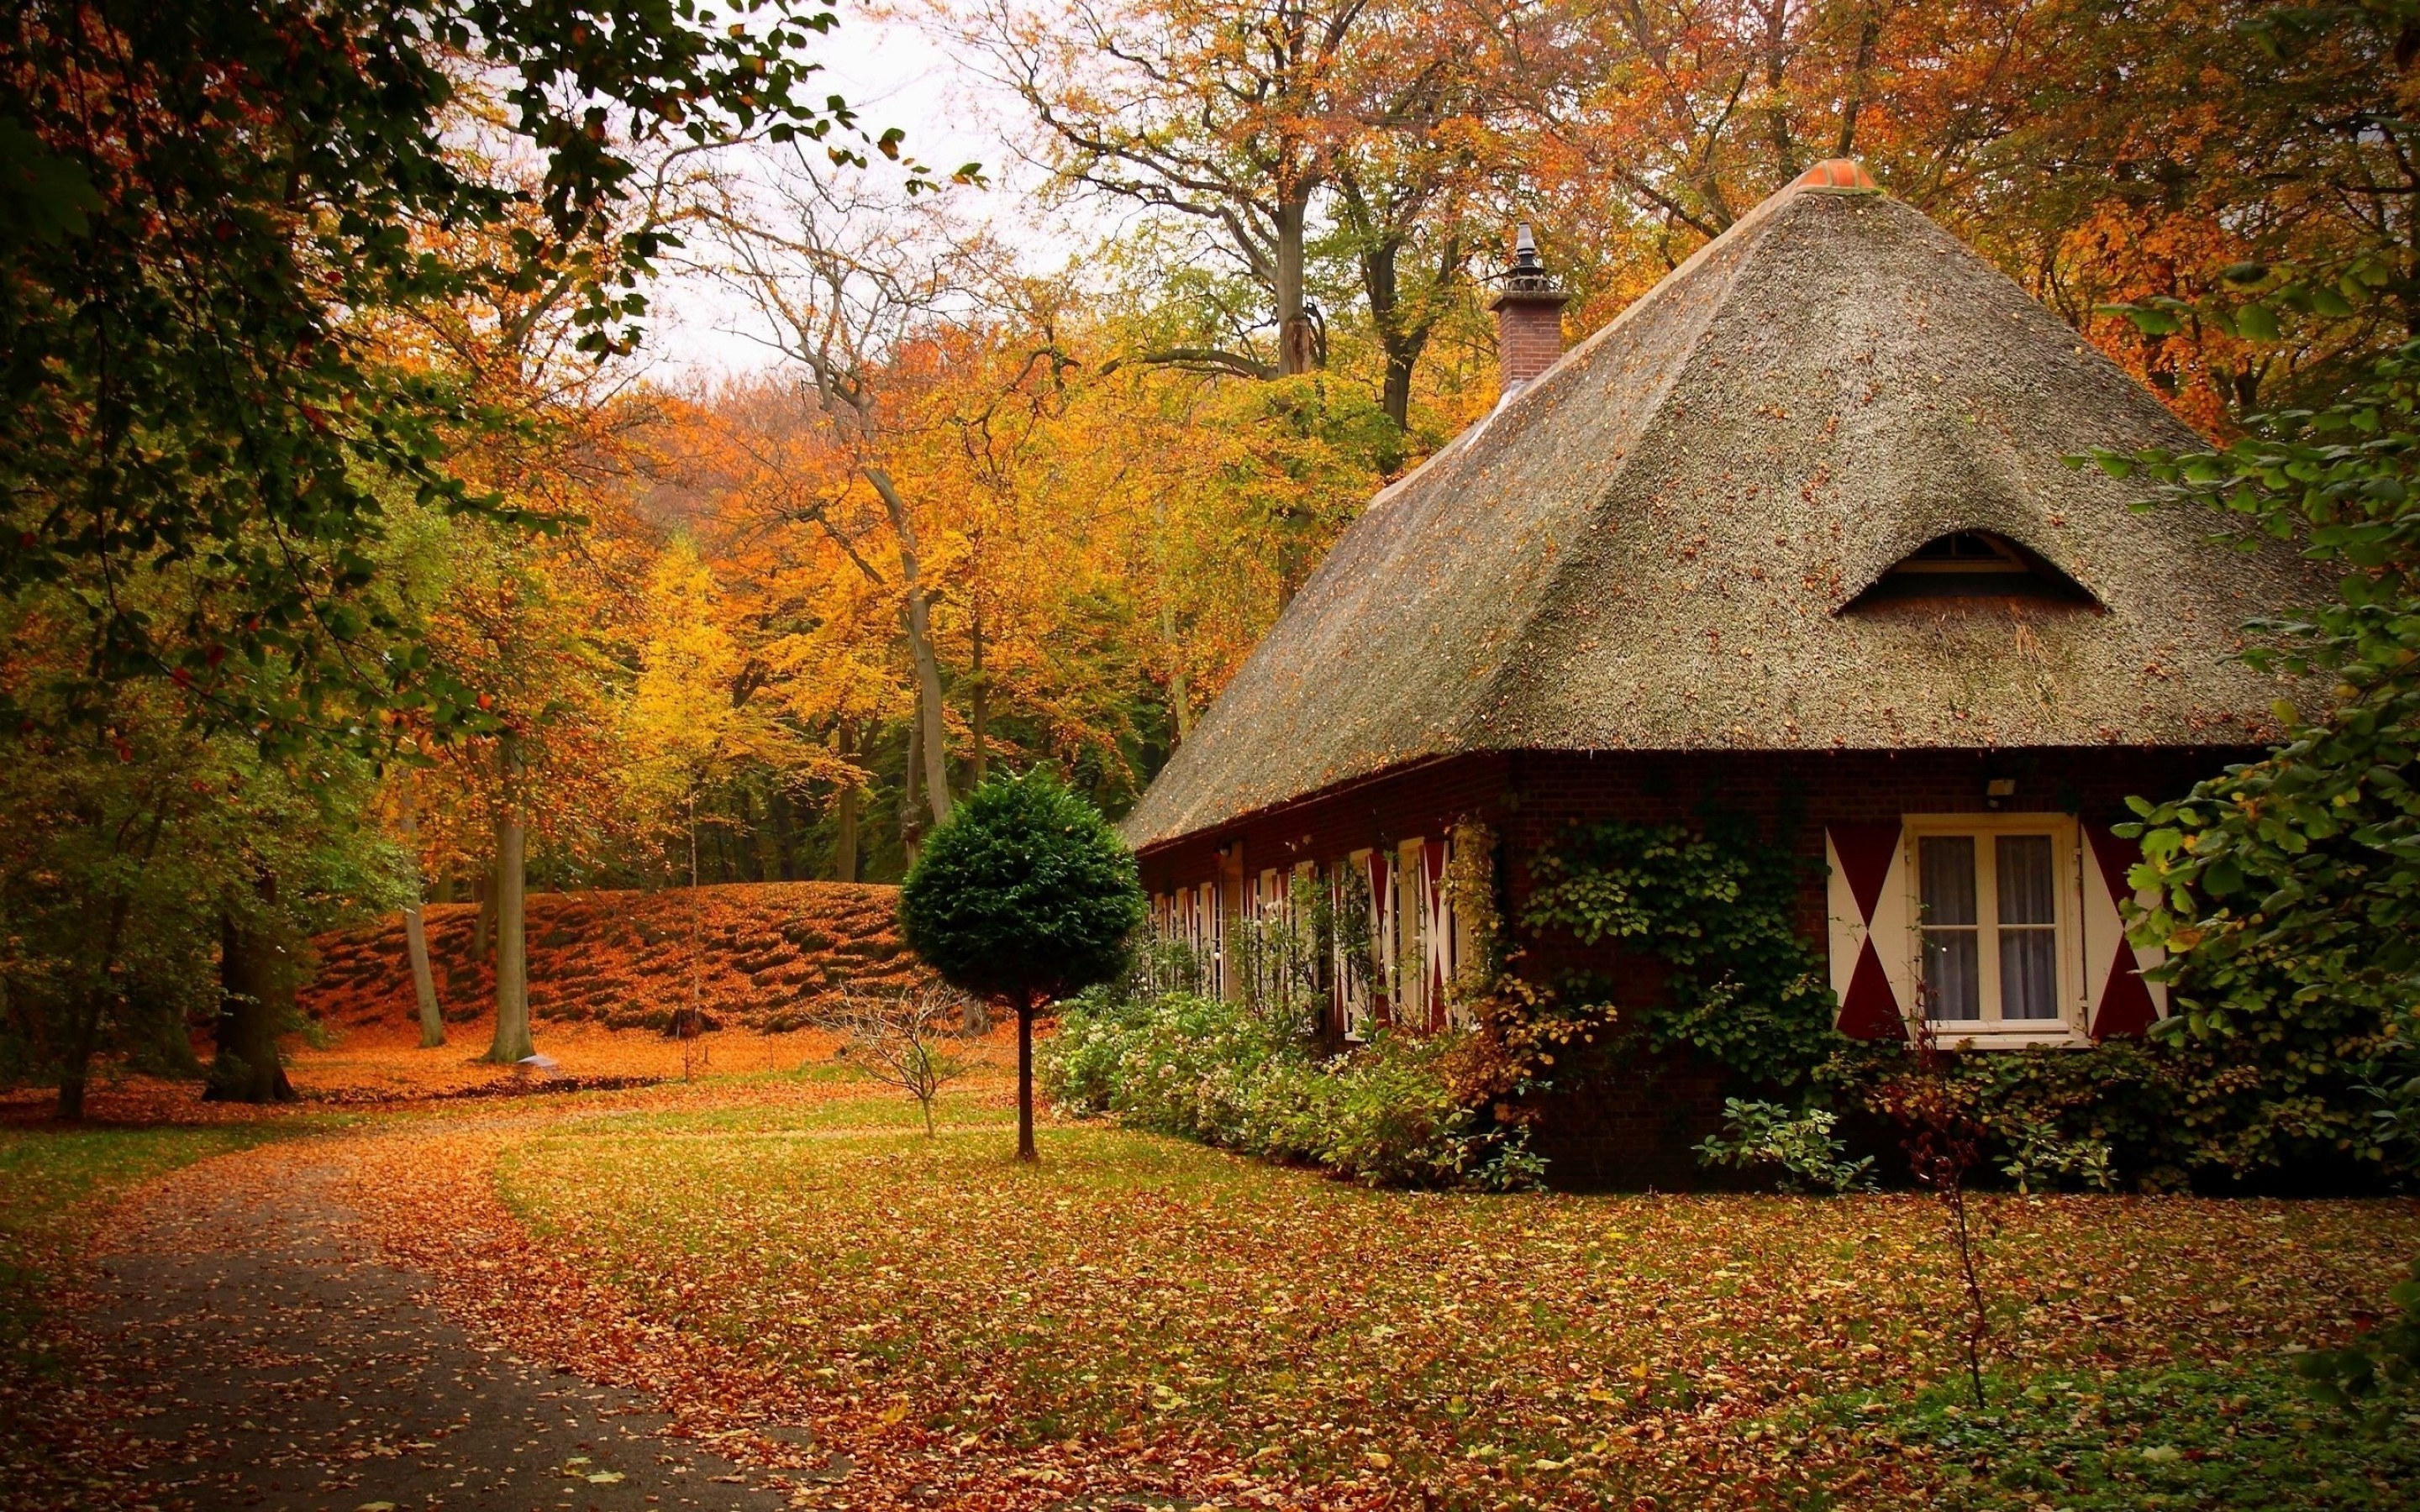 Autumn House Scenery Wallpaper   HD Background